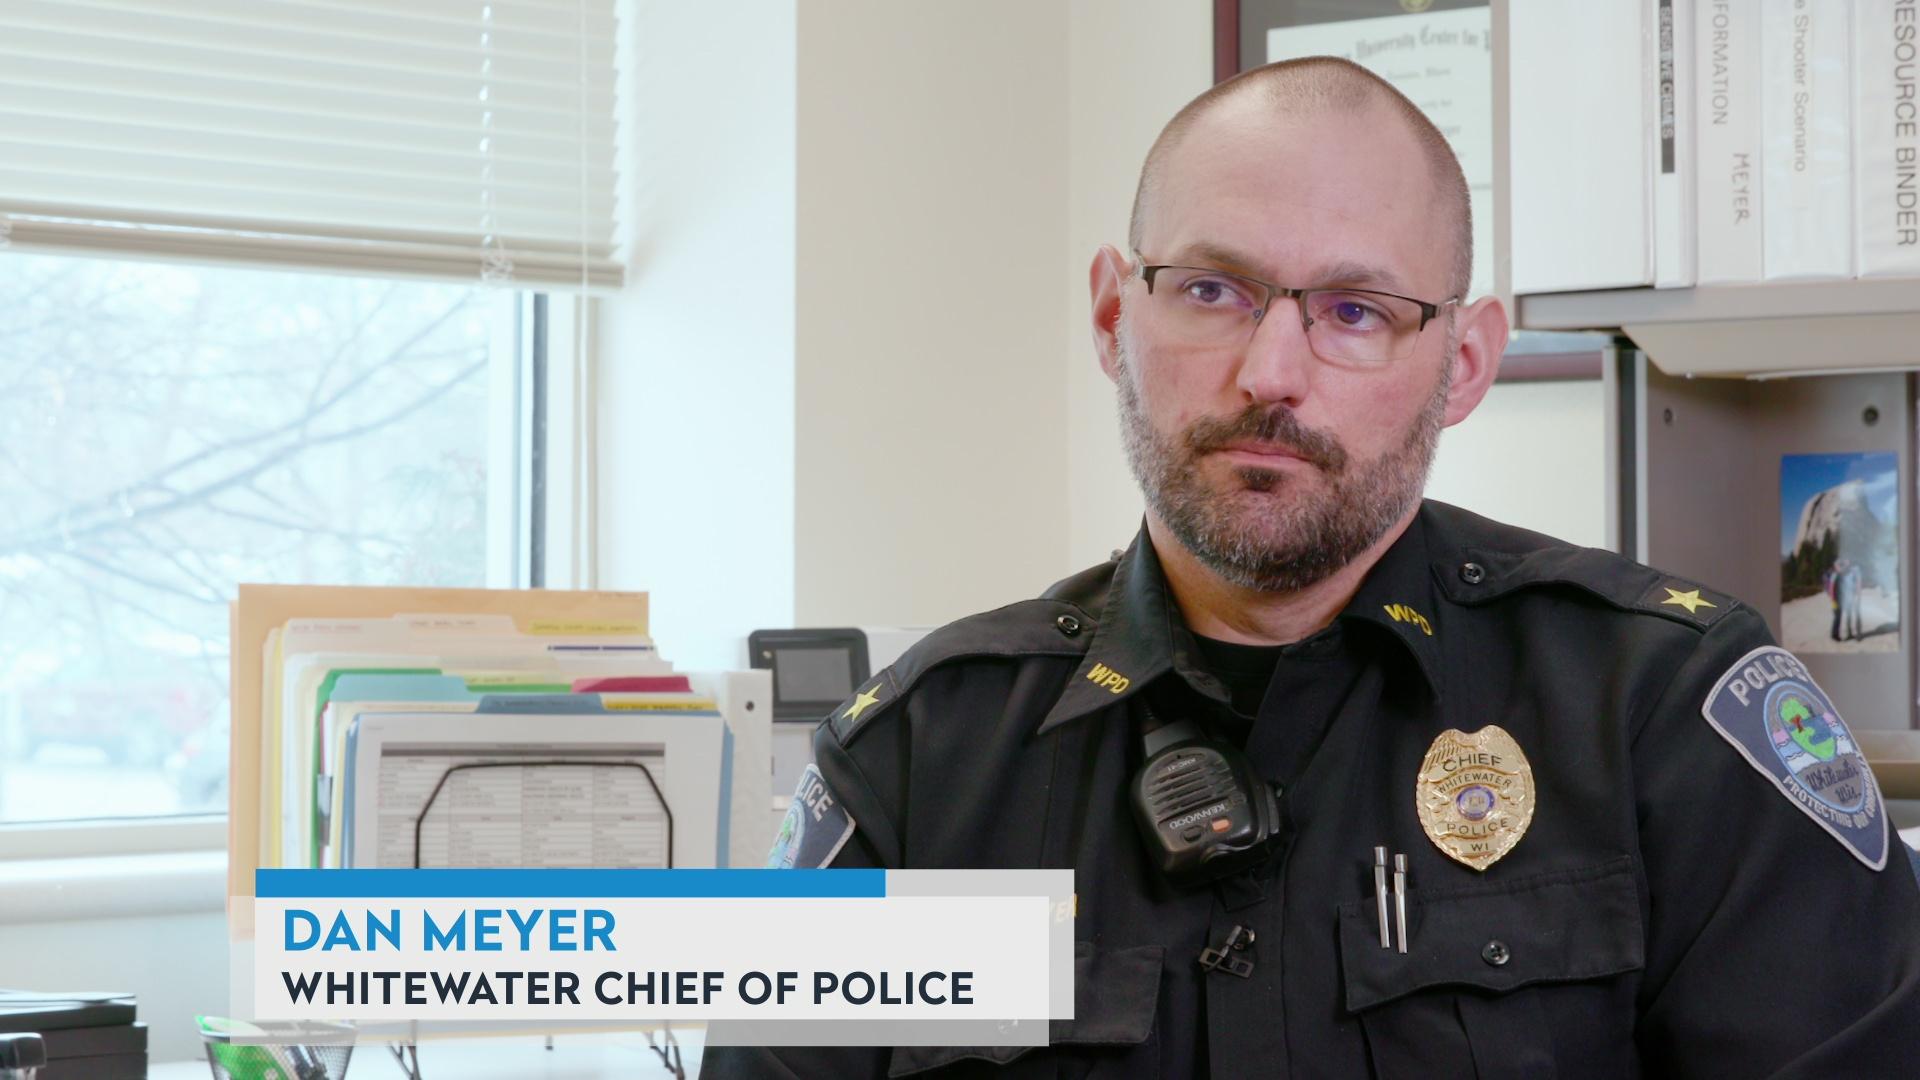 Chief Dan Meyer on growing numbers of migrants in Whitewater